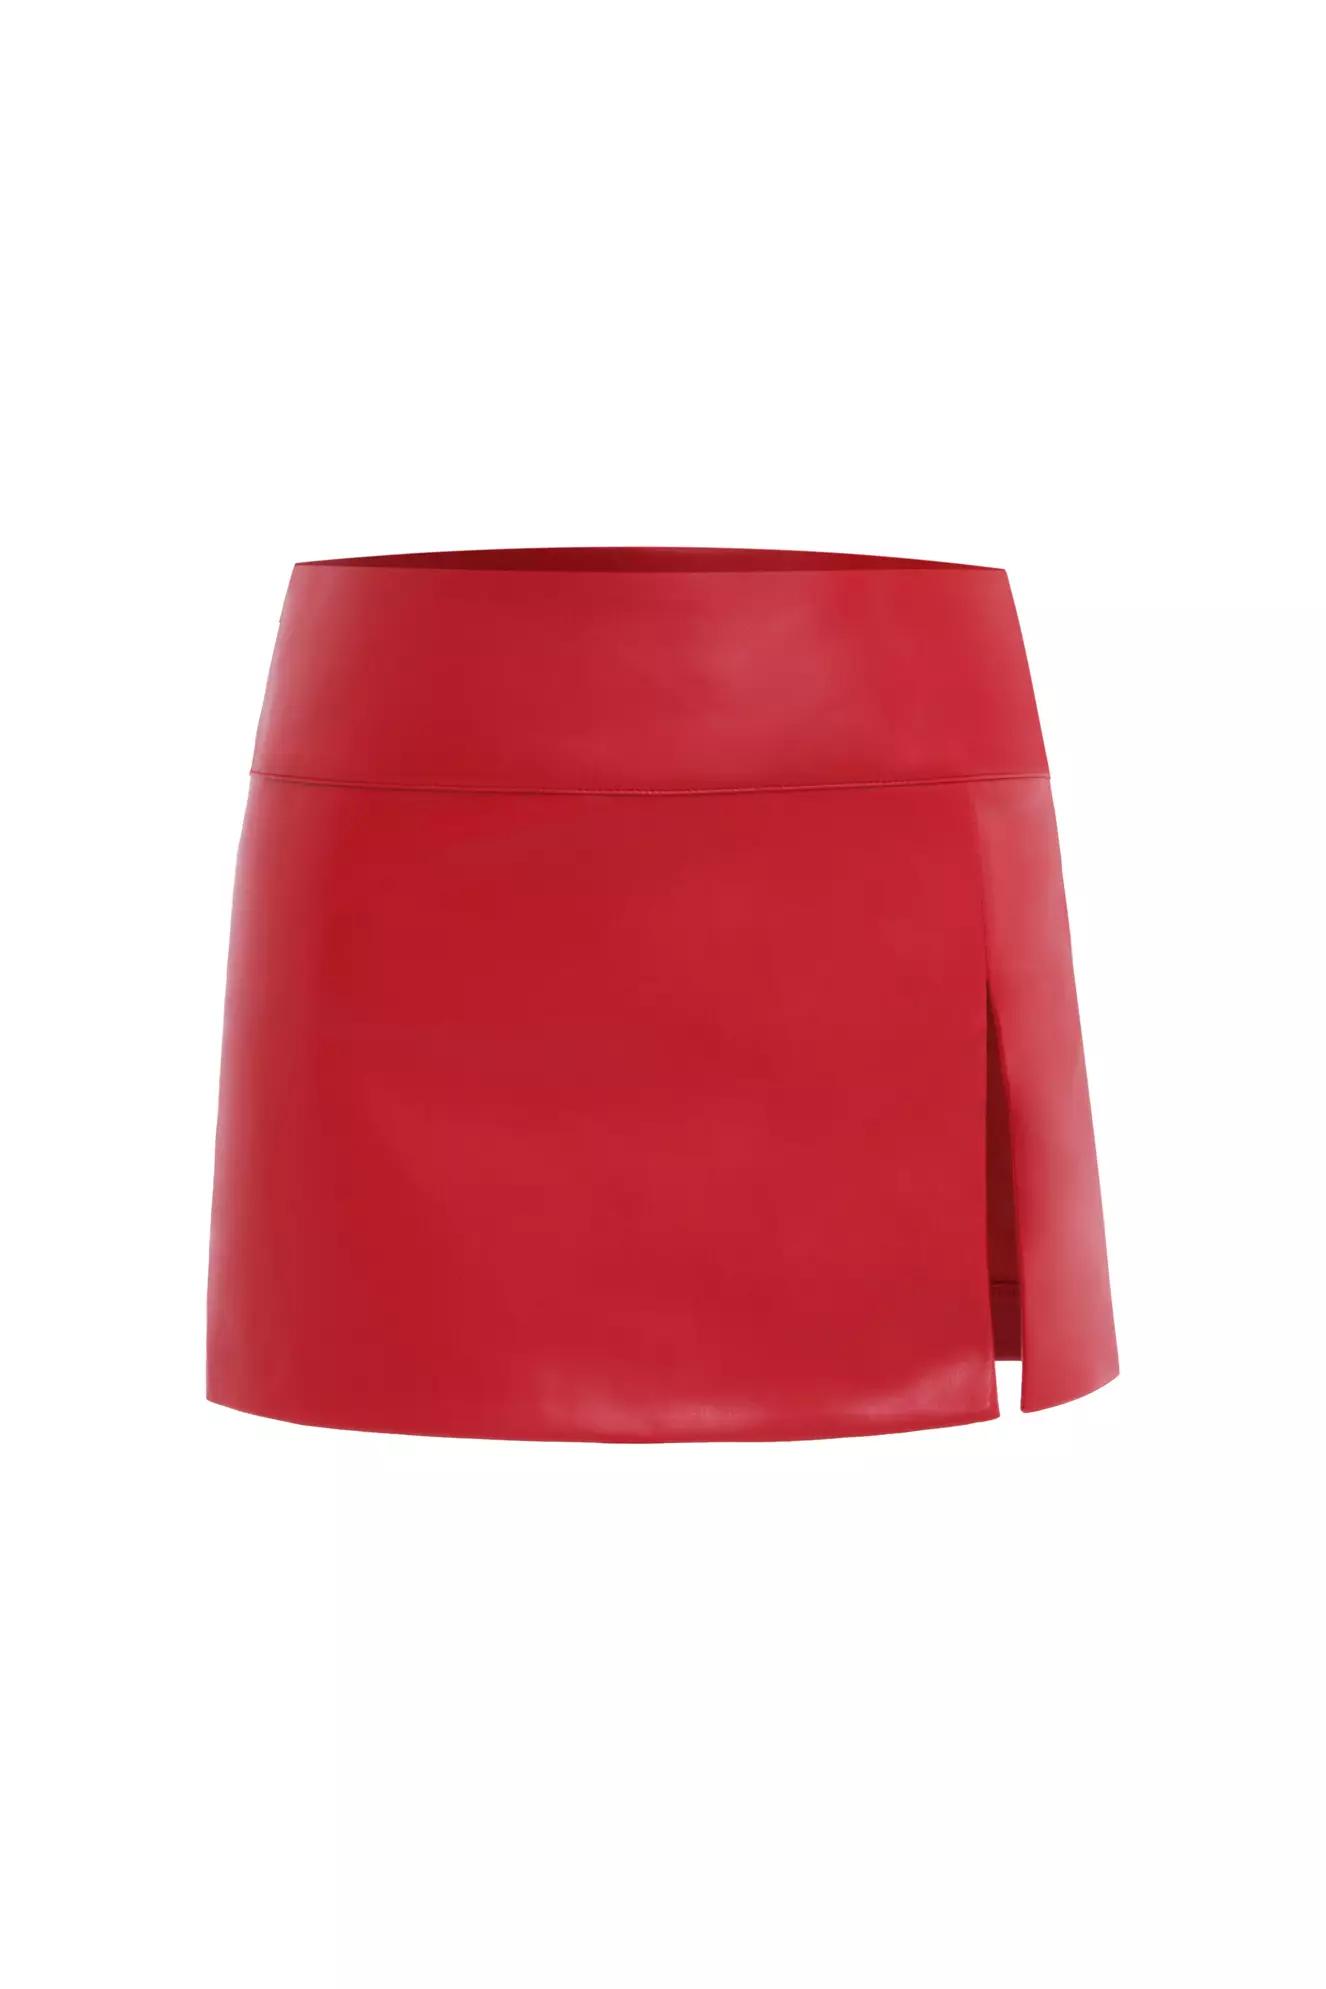 Red leather mini skirt